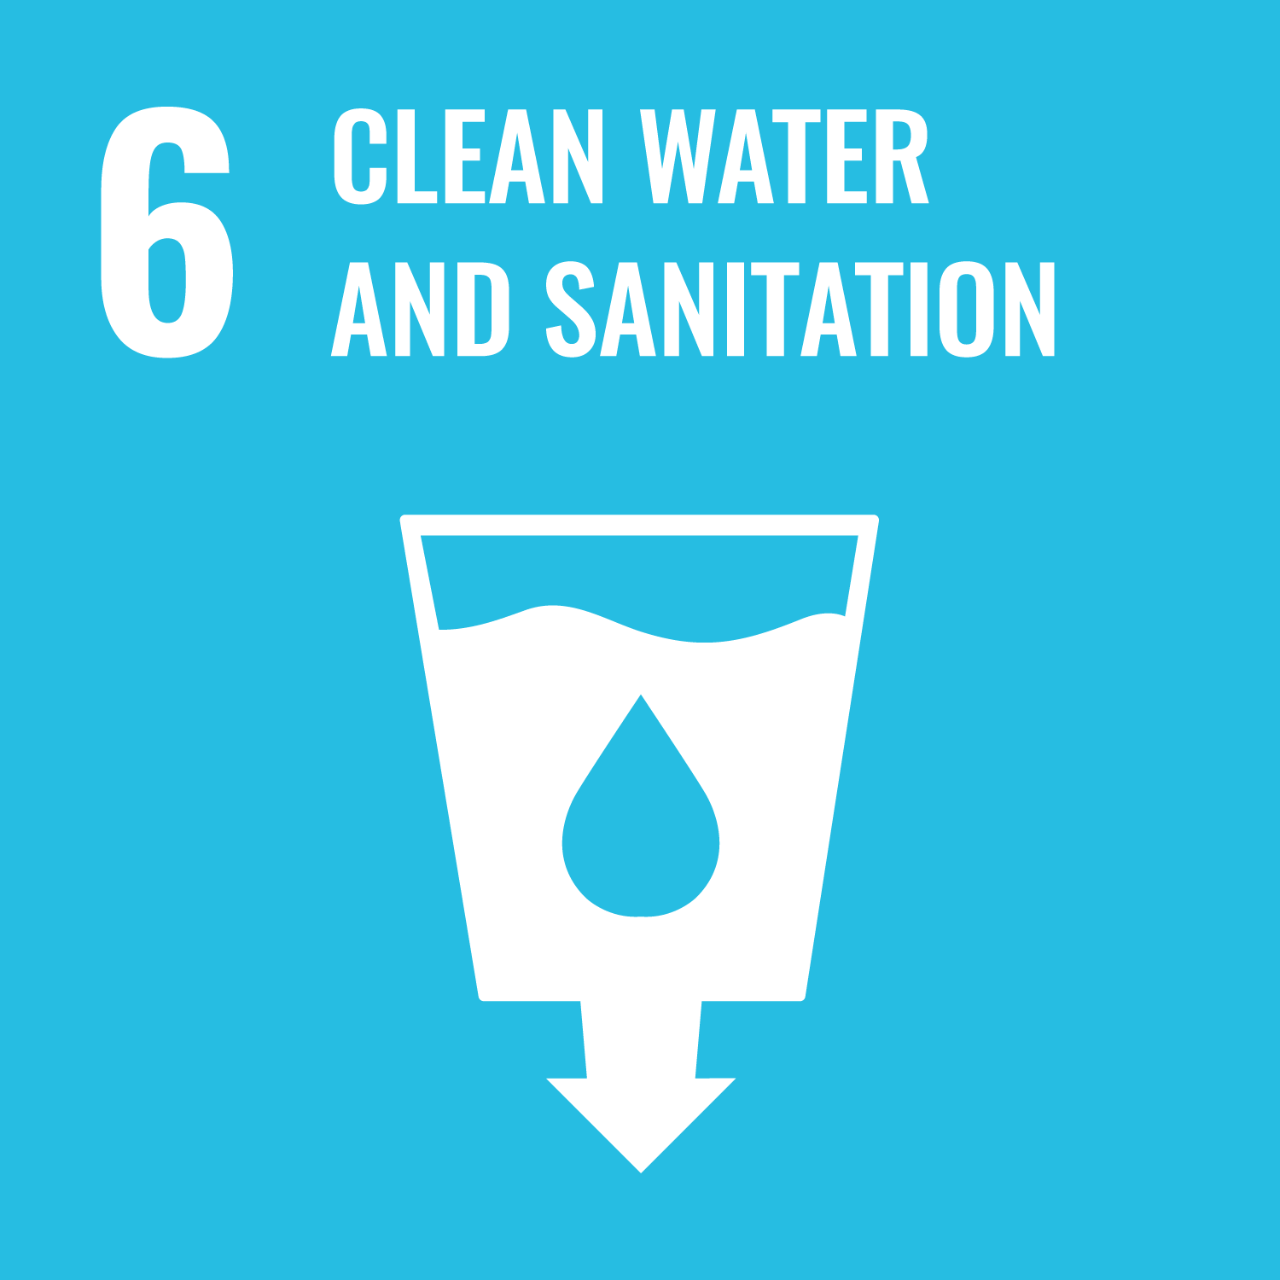 Blue icon with graphic of water glass with arrow to represent UNSDG Goal 6: Clean Water and Sanitation.